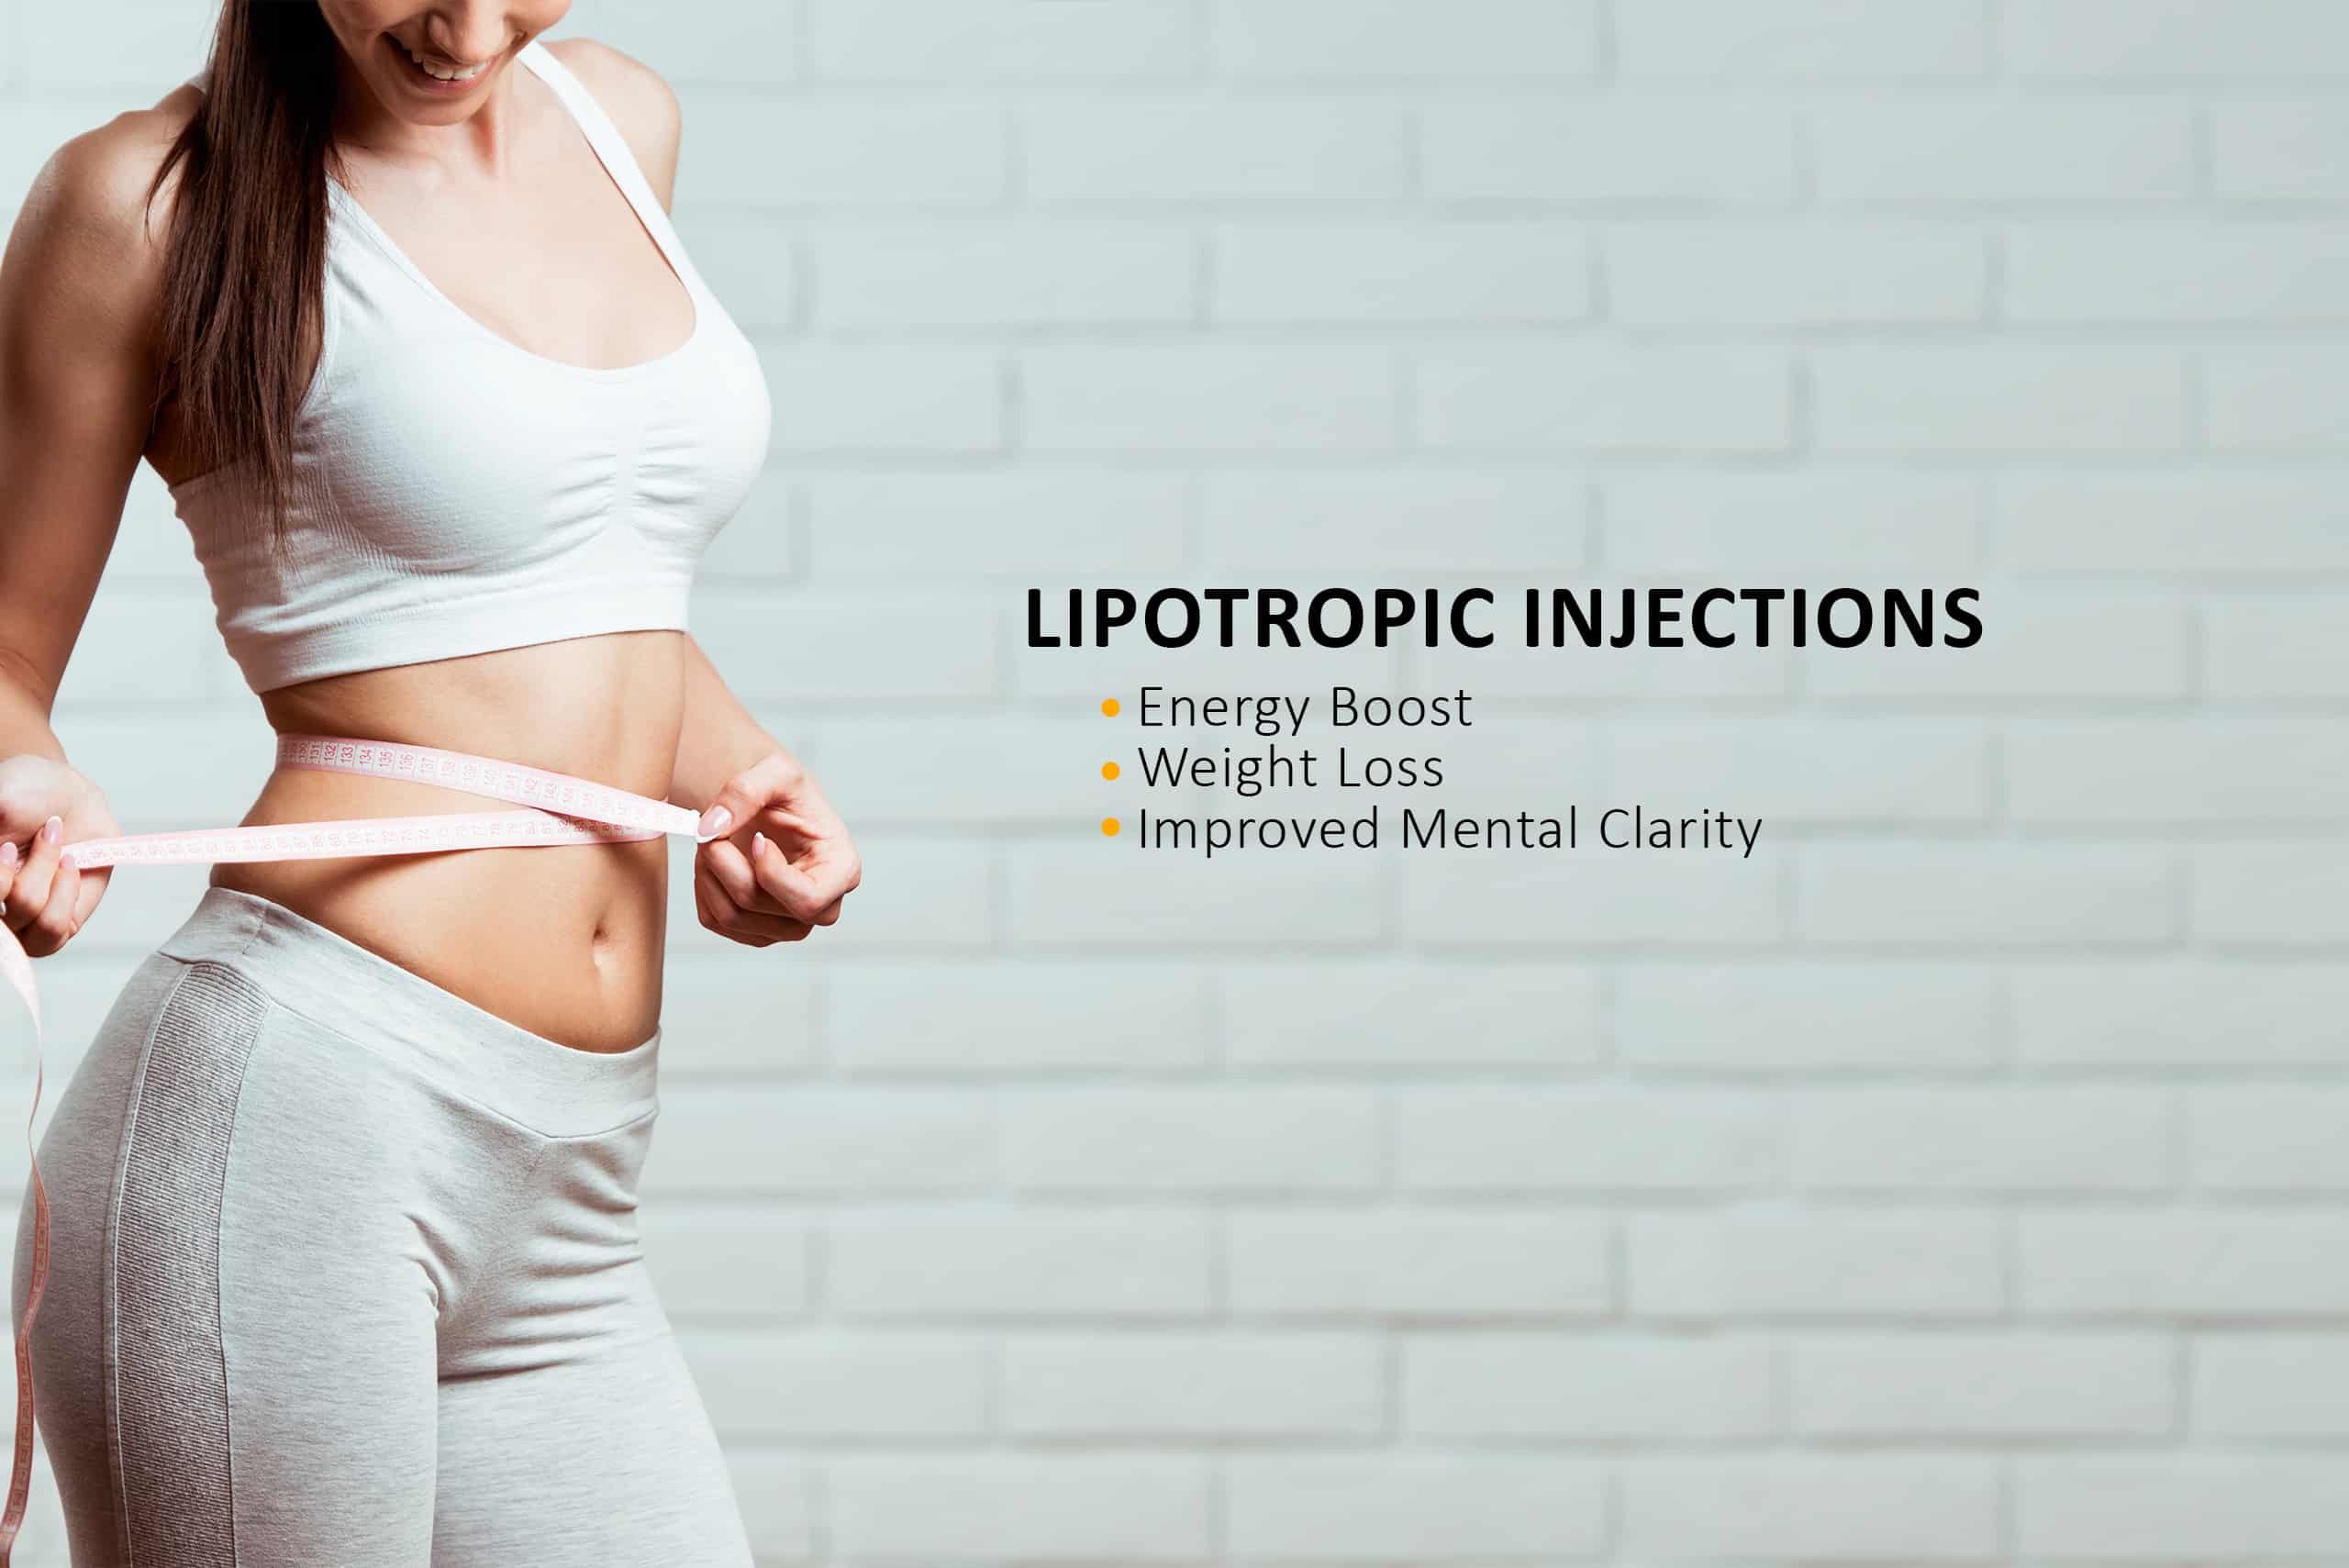 Lipotropic Injections: The Best Fat Burner for Belly Fat & Reducing Cravings